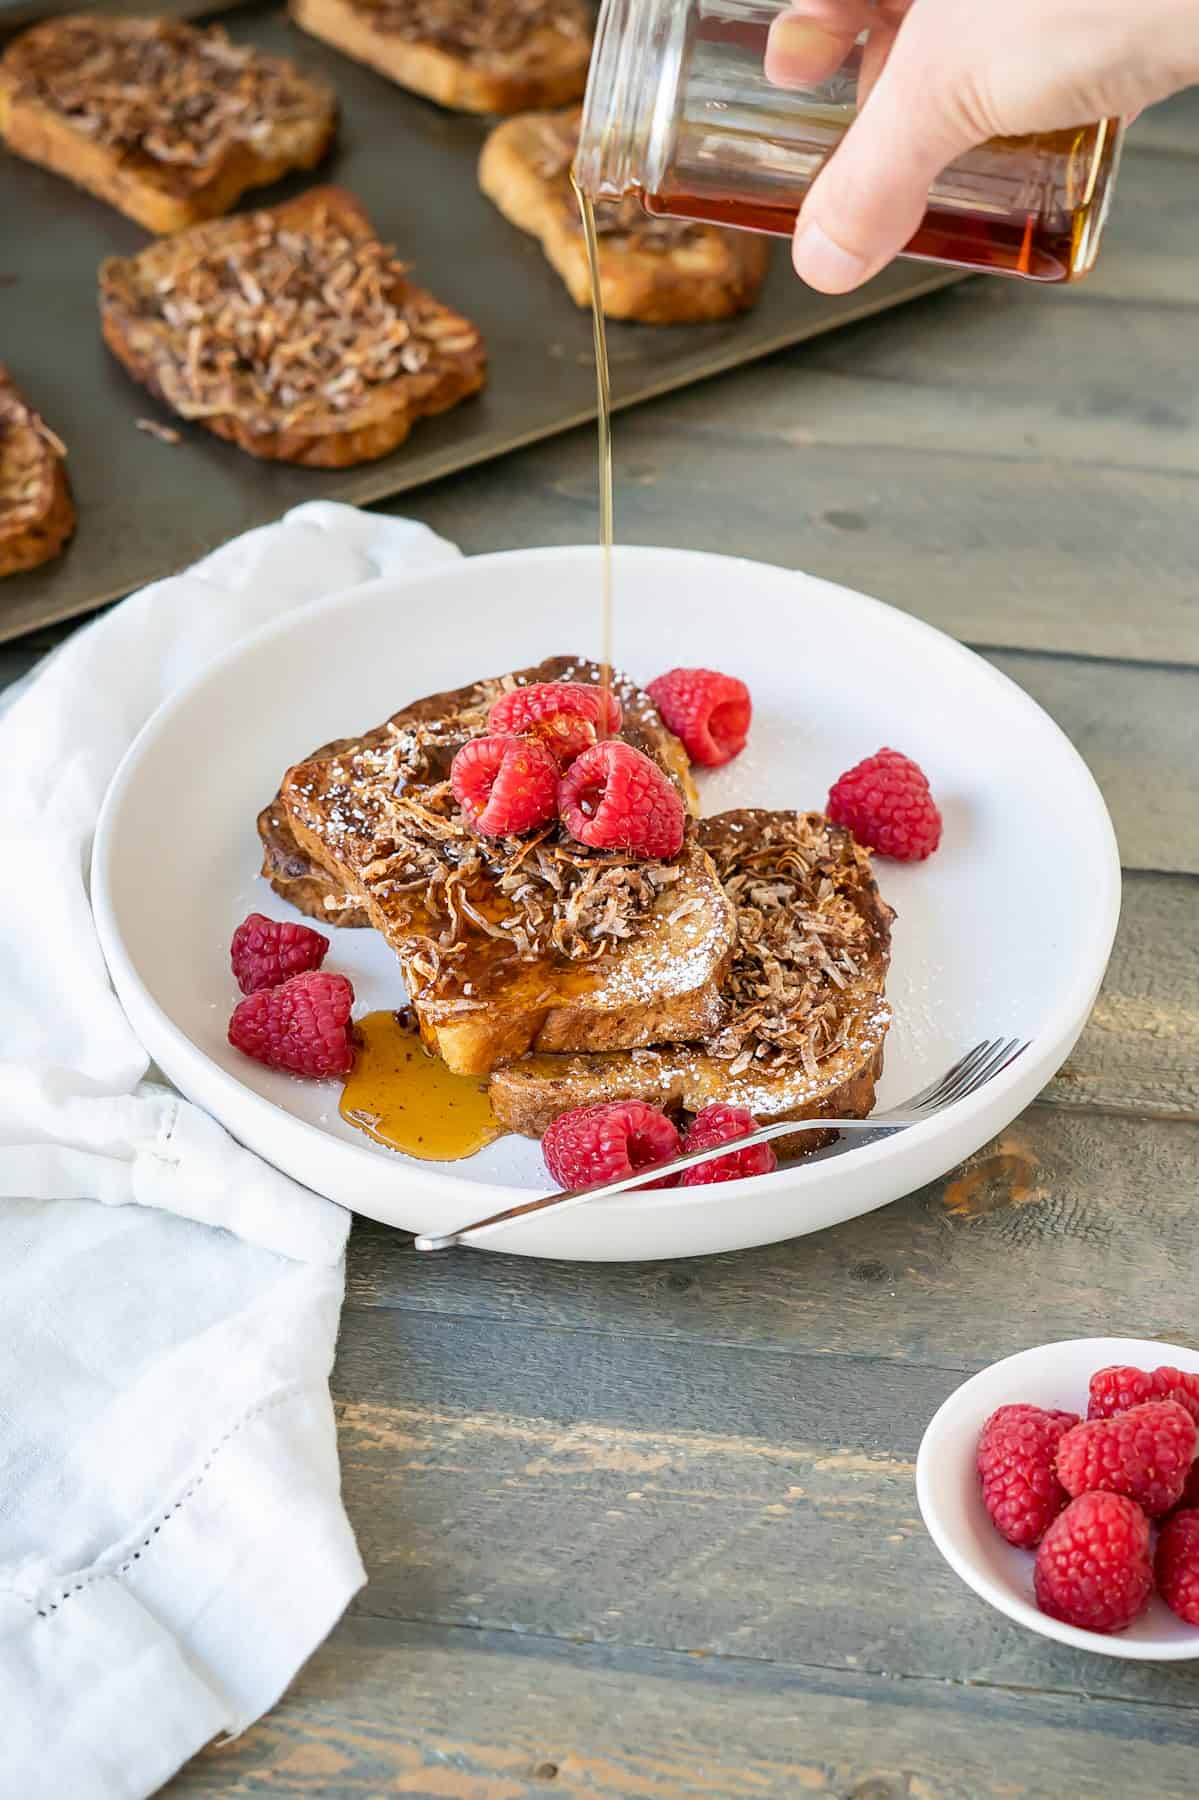 A hand pouring syrup over a coconut french toast stack with fresh raspberries.